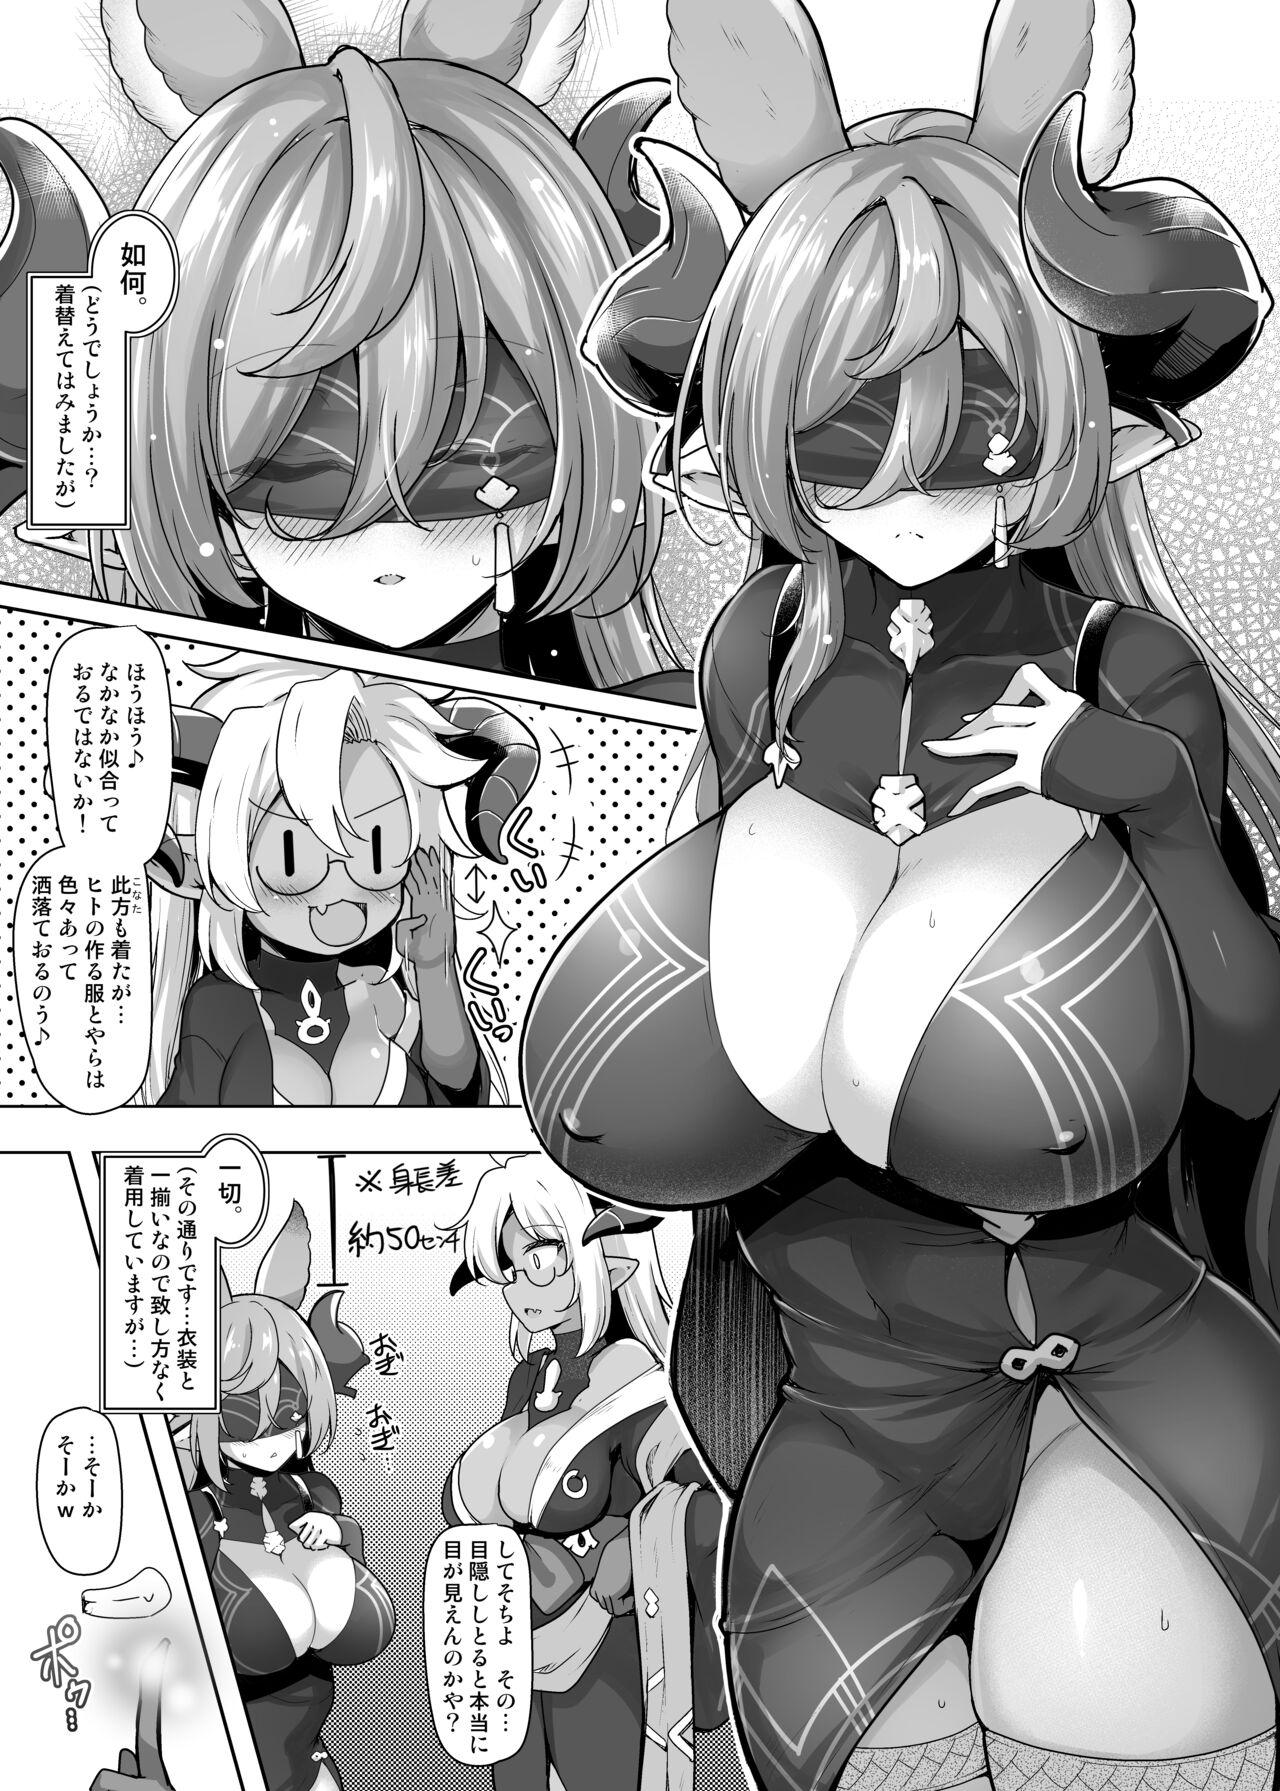 Massages Meippai no Shukufuku o - Blessing of the Full Measure - Granblue fantasy Creampies - Page 5